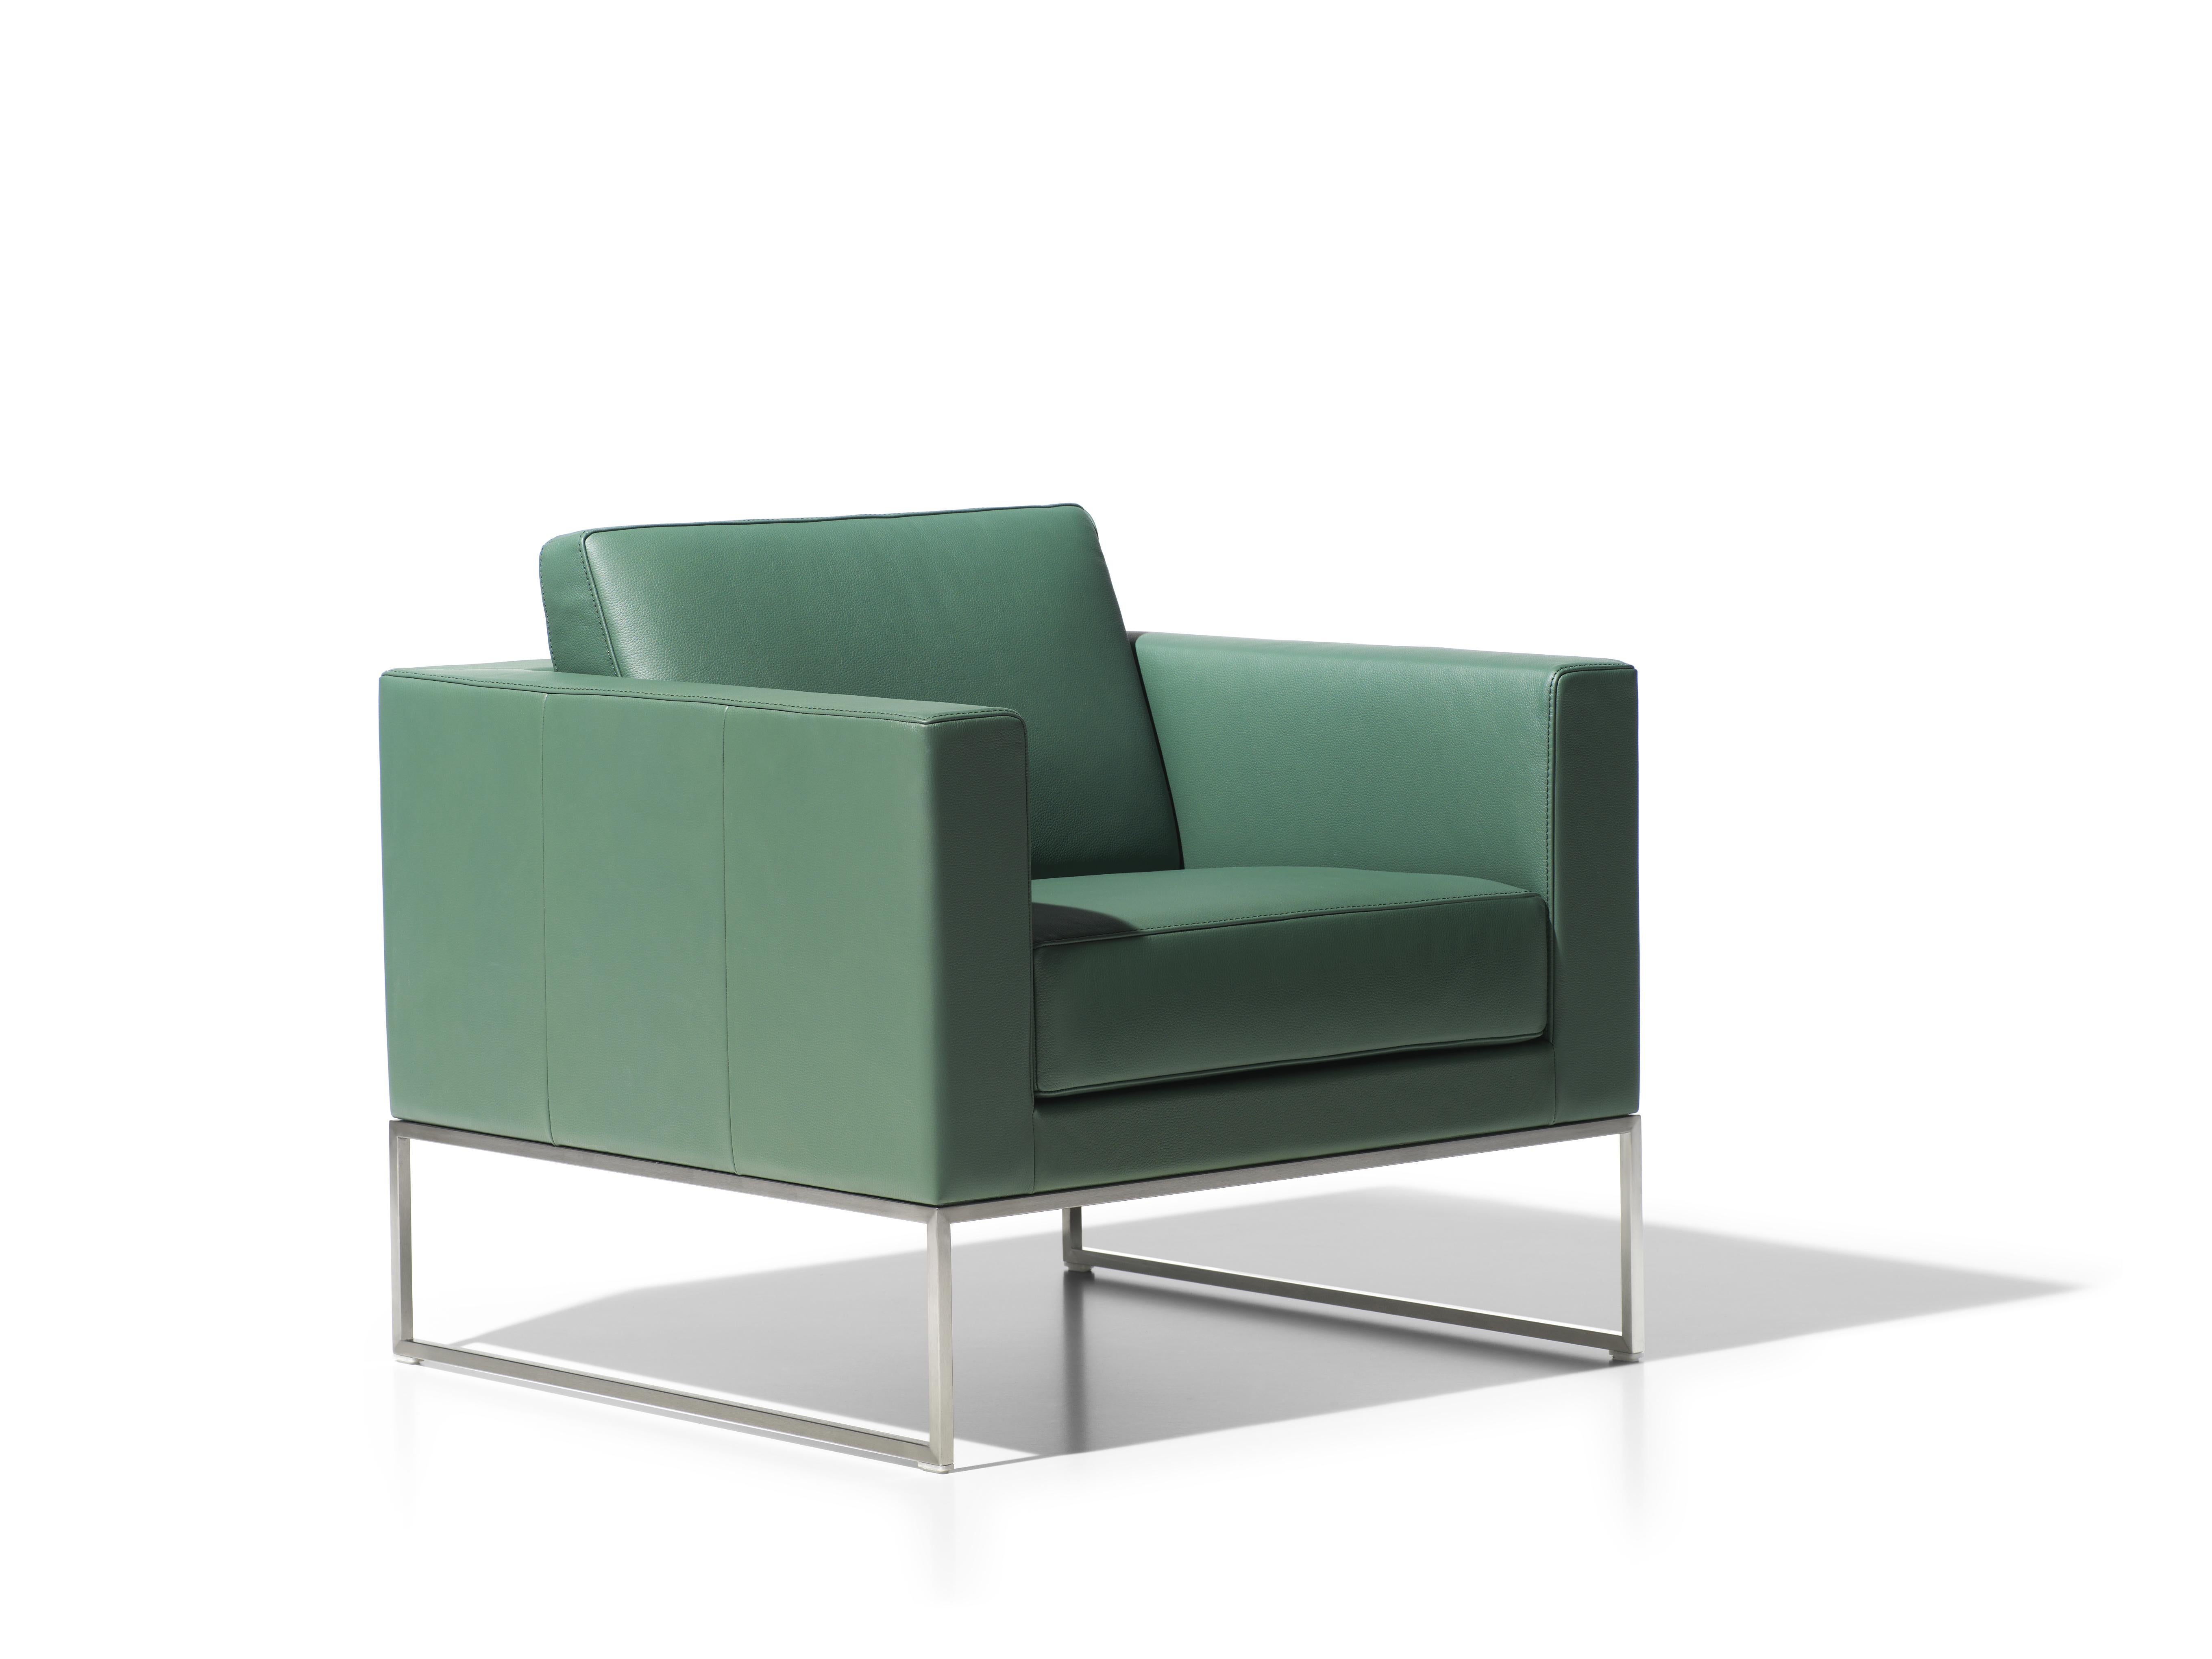 DS-160 armchair by De Sede
Design: Werner Aisslinger
Dimensions: D 51 x W 80 x H 74 cm
Materials: steel, leather

Prices may change according to the chosen materials and size. 

Five individual elements, each measuring 80 x 80 cm, form the